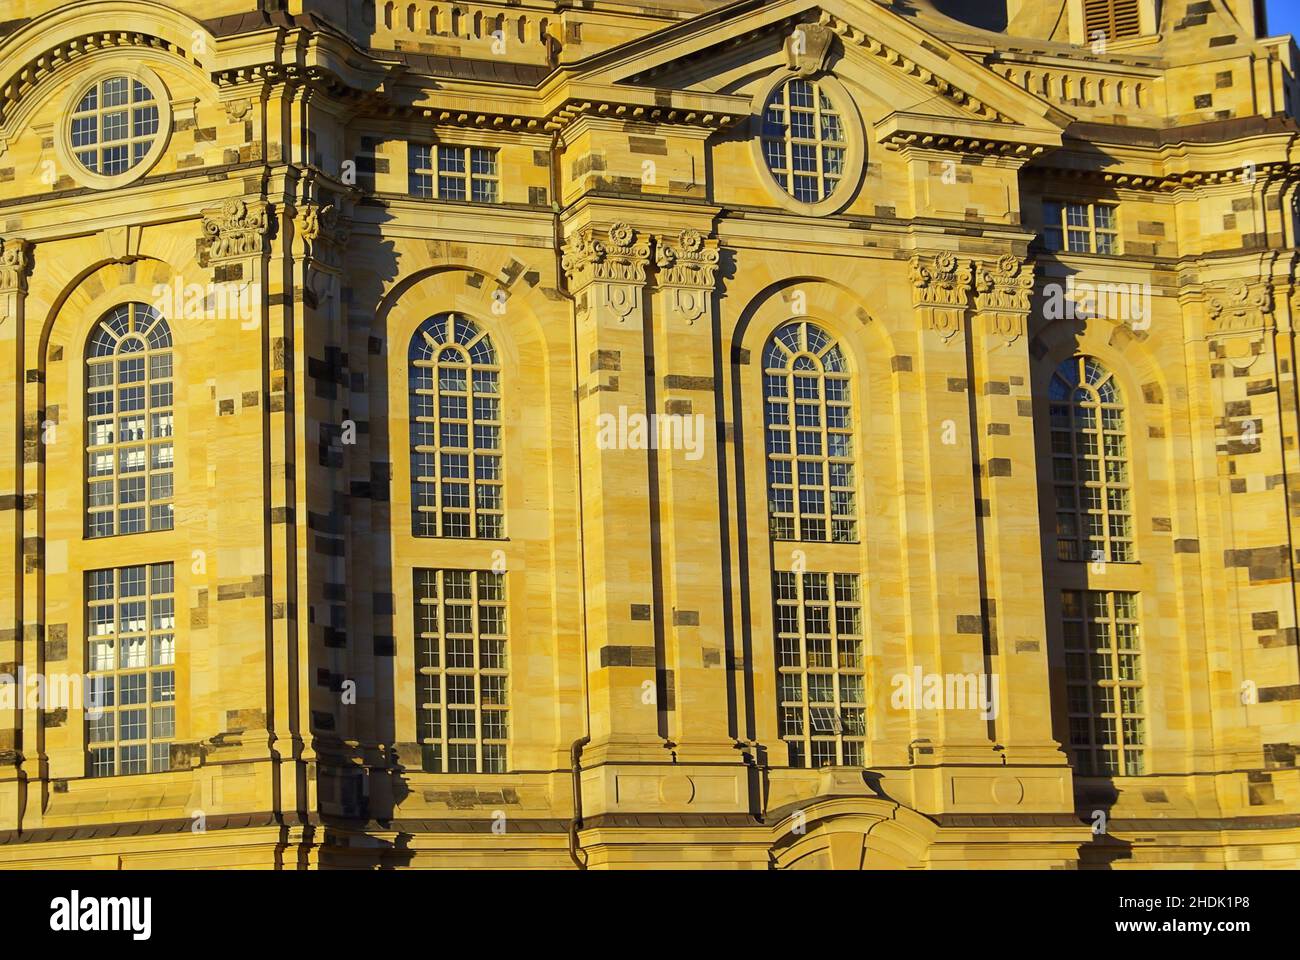 frauenkirche, baroque style, frauenkirches, baroque styles Stock Photo